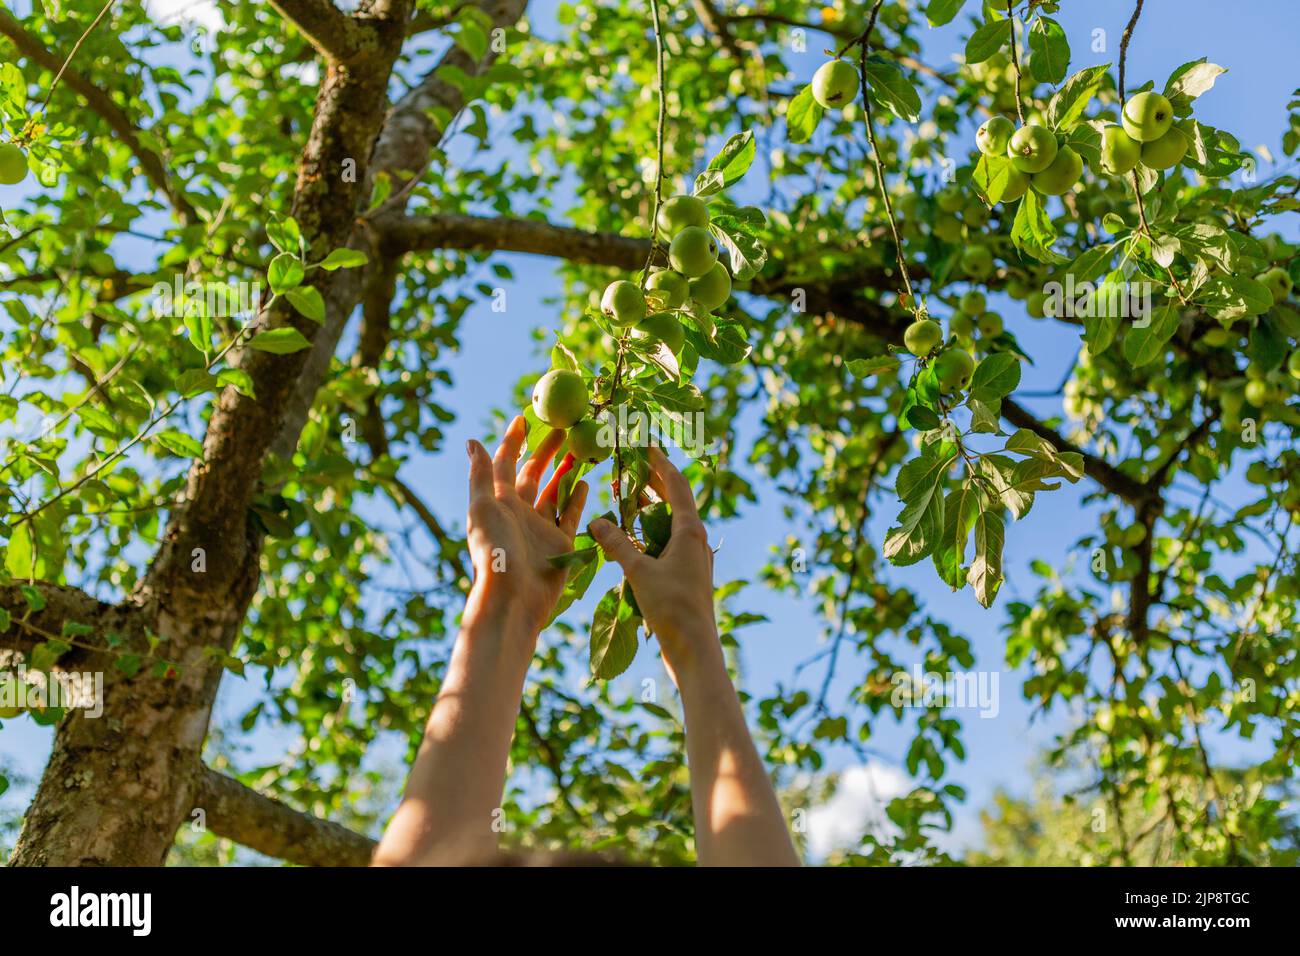 Two hands reaching our for an apple on the tree. Stock Photo